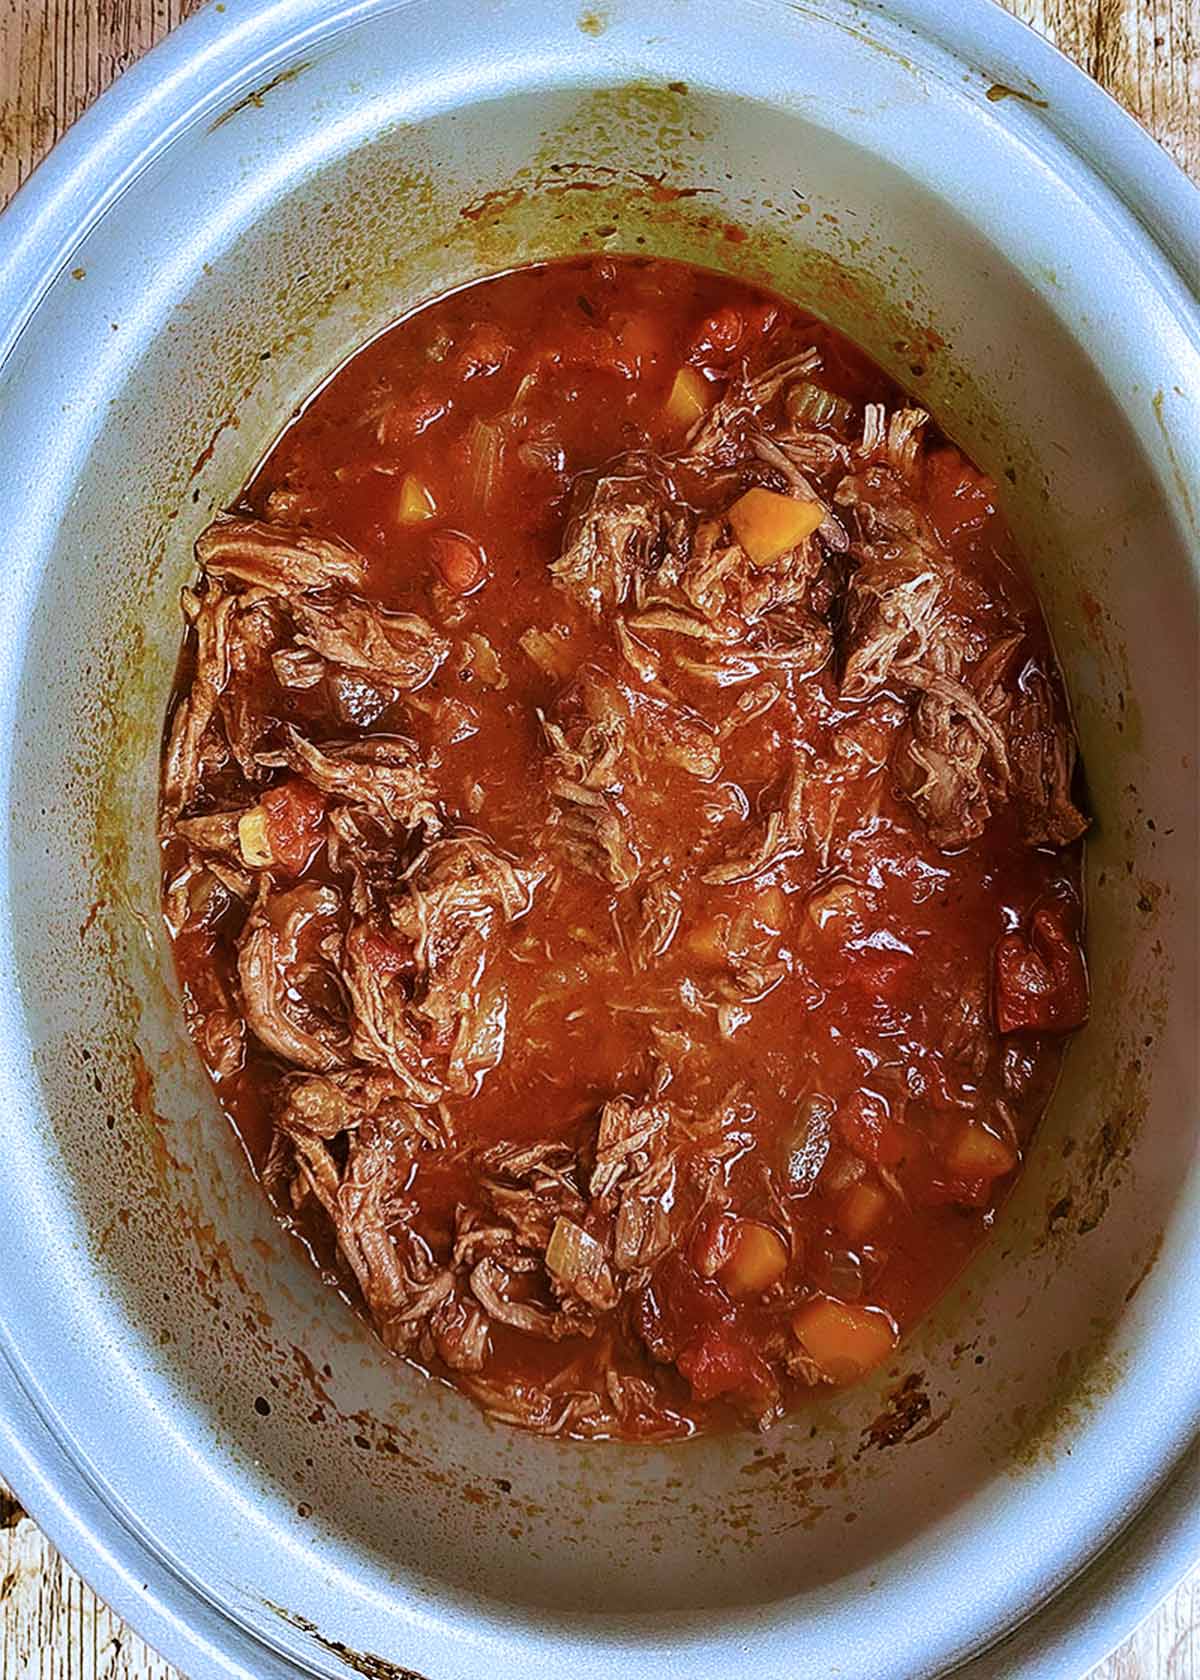 Shredded beef back in the sauce in the slow cooker.